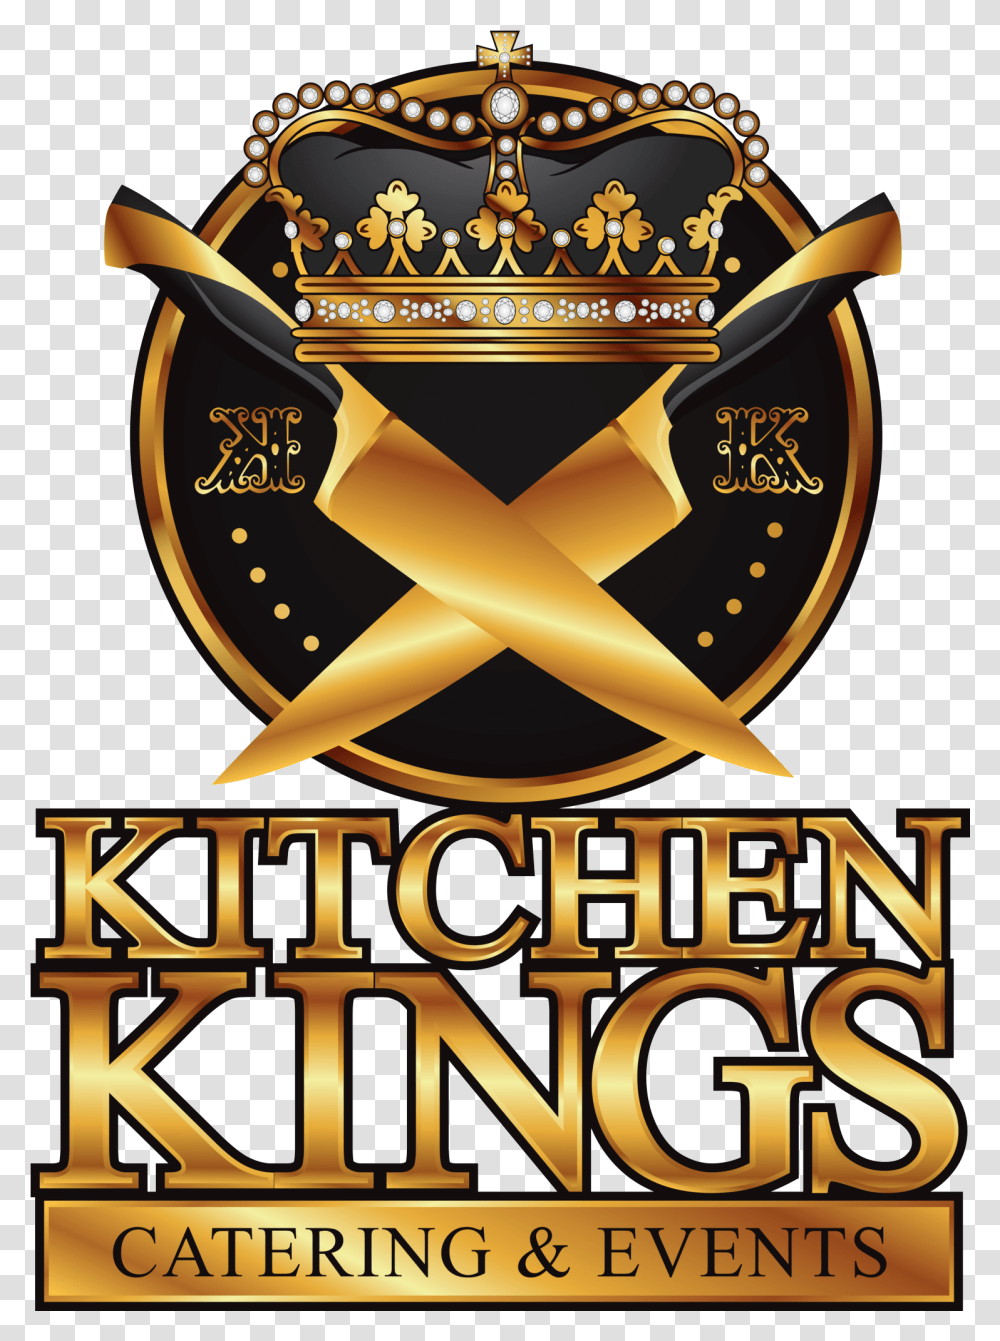 The Kitchen Kings Logo Product Full Size Download Kings Kitchen Logo, Symbol, Trademark, Poster, Advertisement Transparent Png